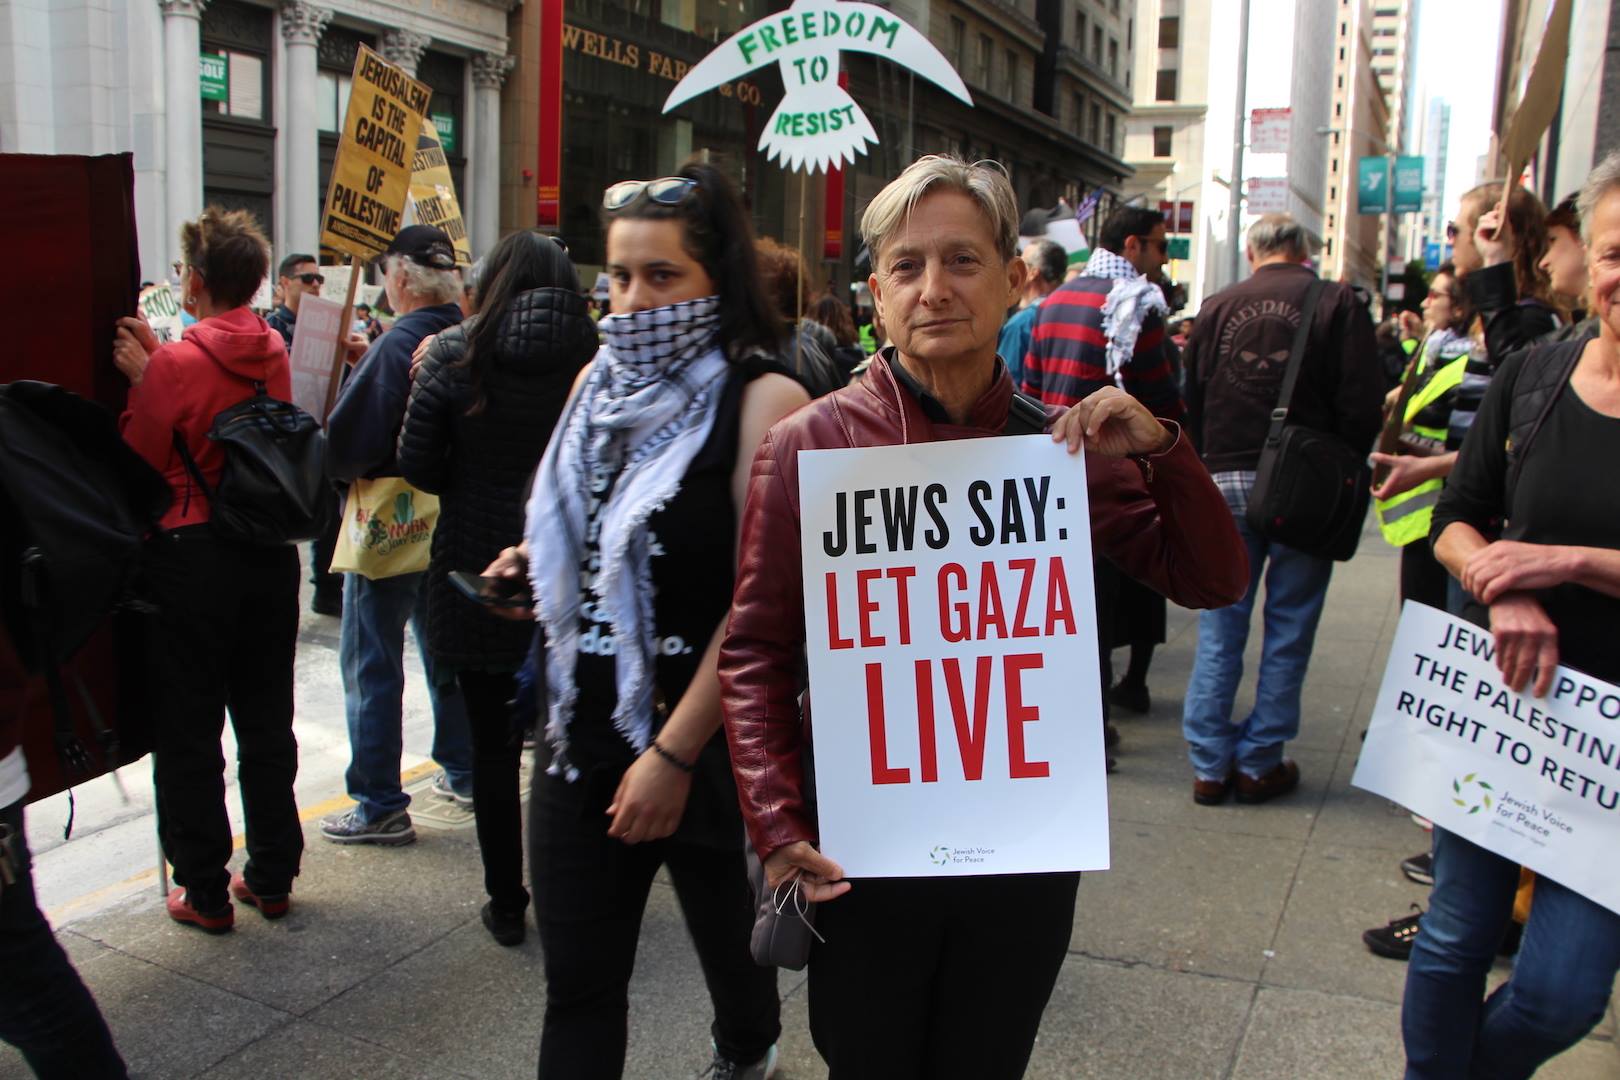 Scholar, author and member of JVP's academic council, Judith Butler, protests the killing of Palestinians in Gaza. Photo credit: jewishvoiceforpeace.org